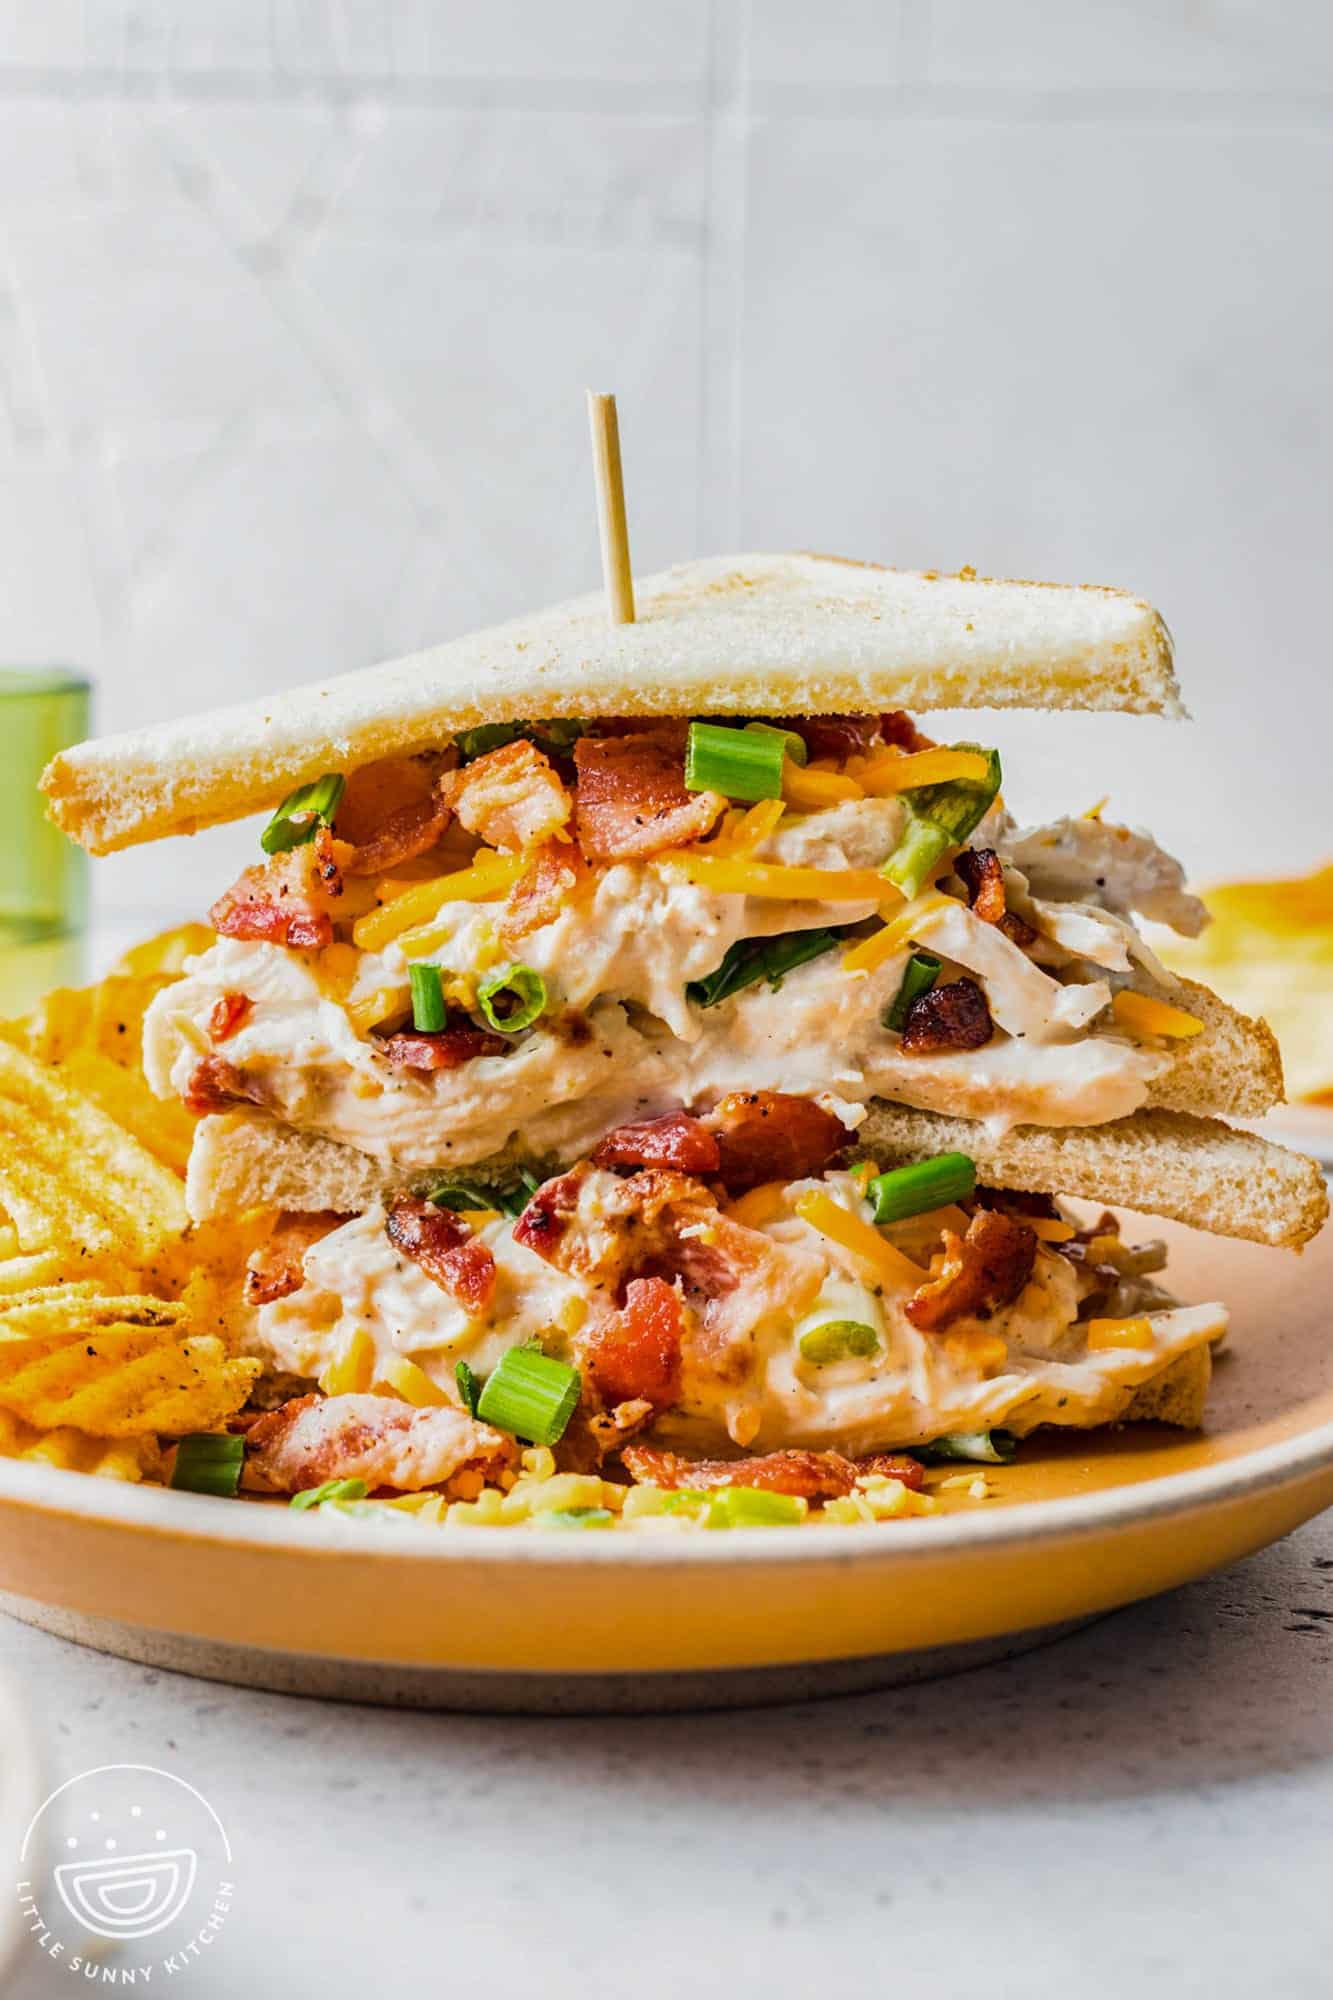 crack chicken sandwiches on thin toasted bread, two sandwiches on top of each other with a skewer holding them together.